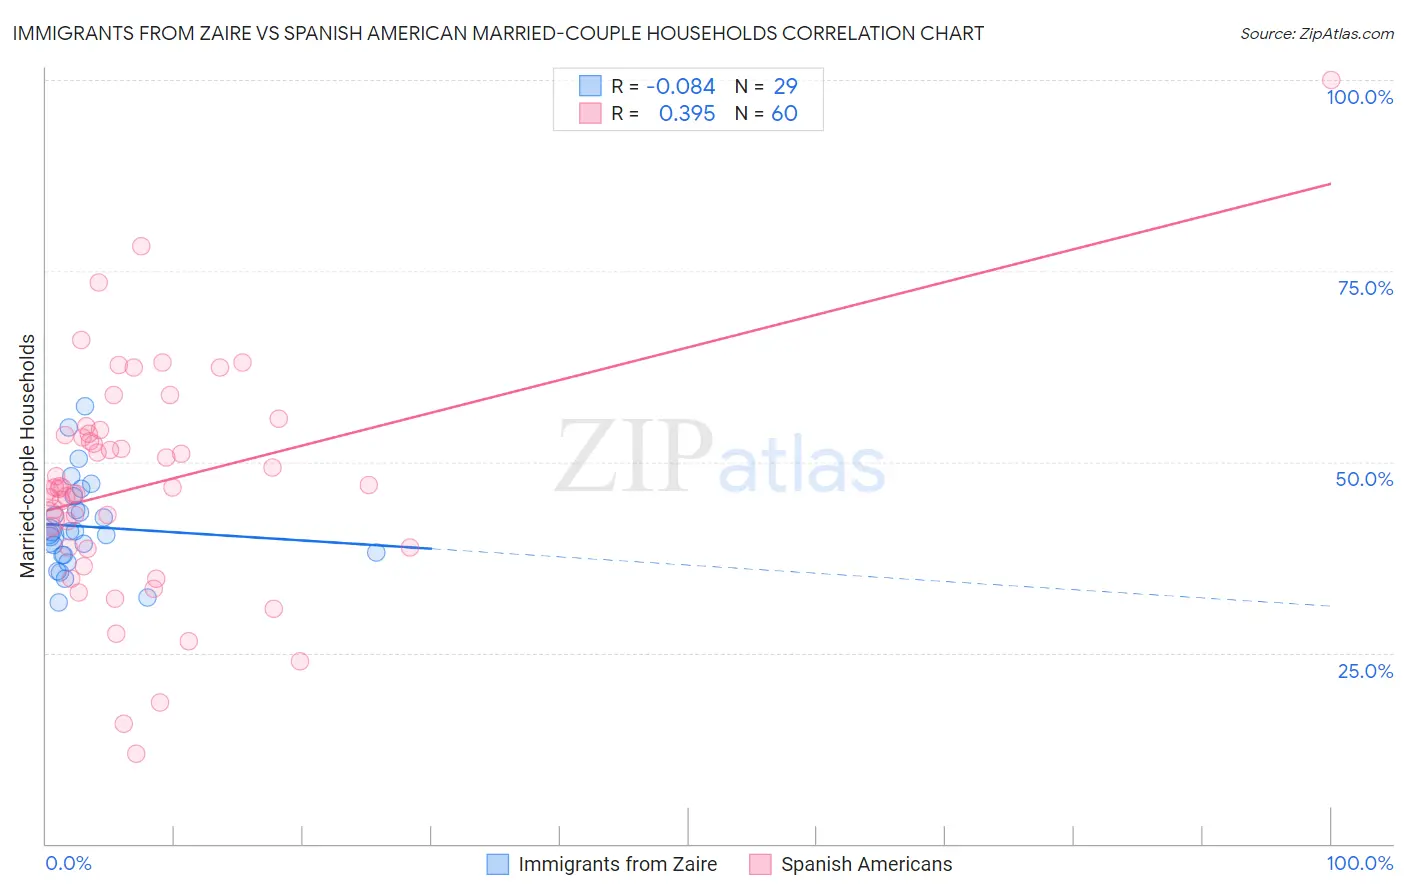 Immigrants from Zaire vs Spanish American Married-couple Households